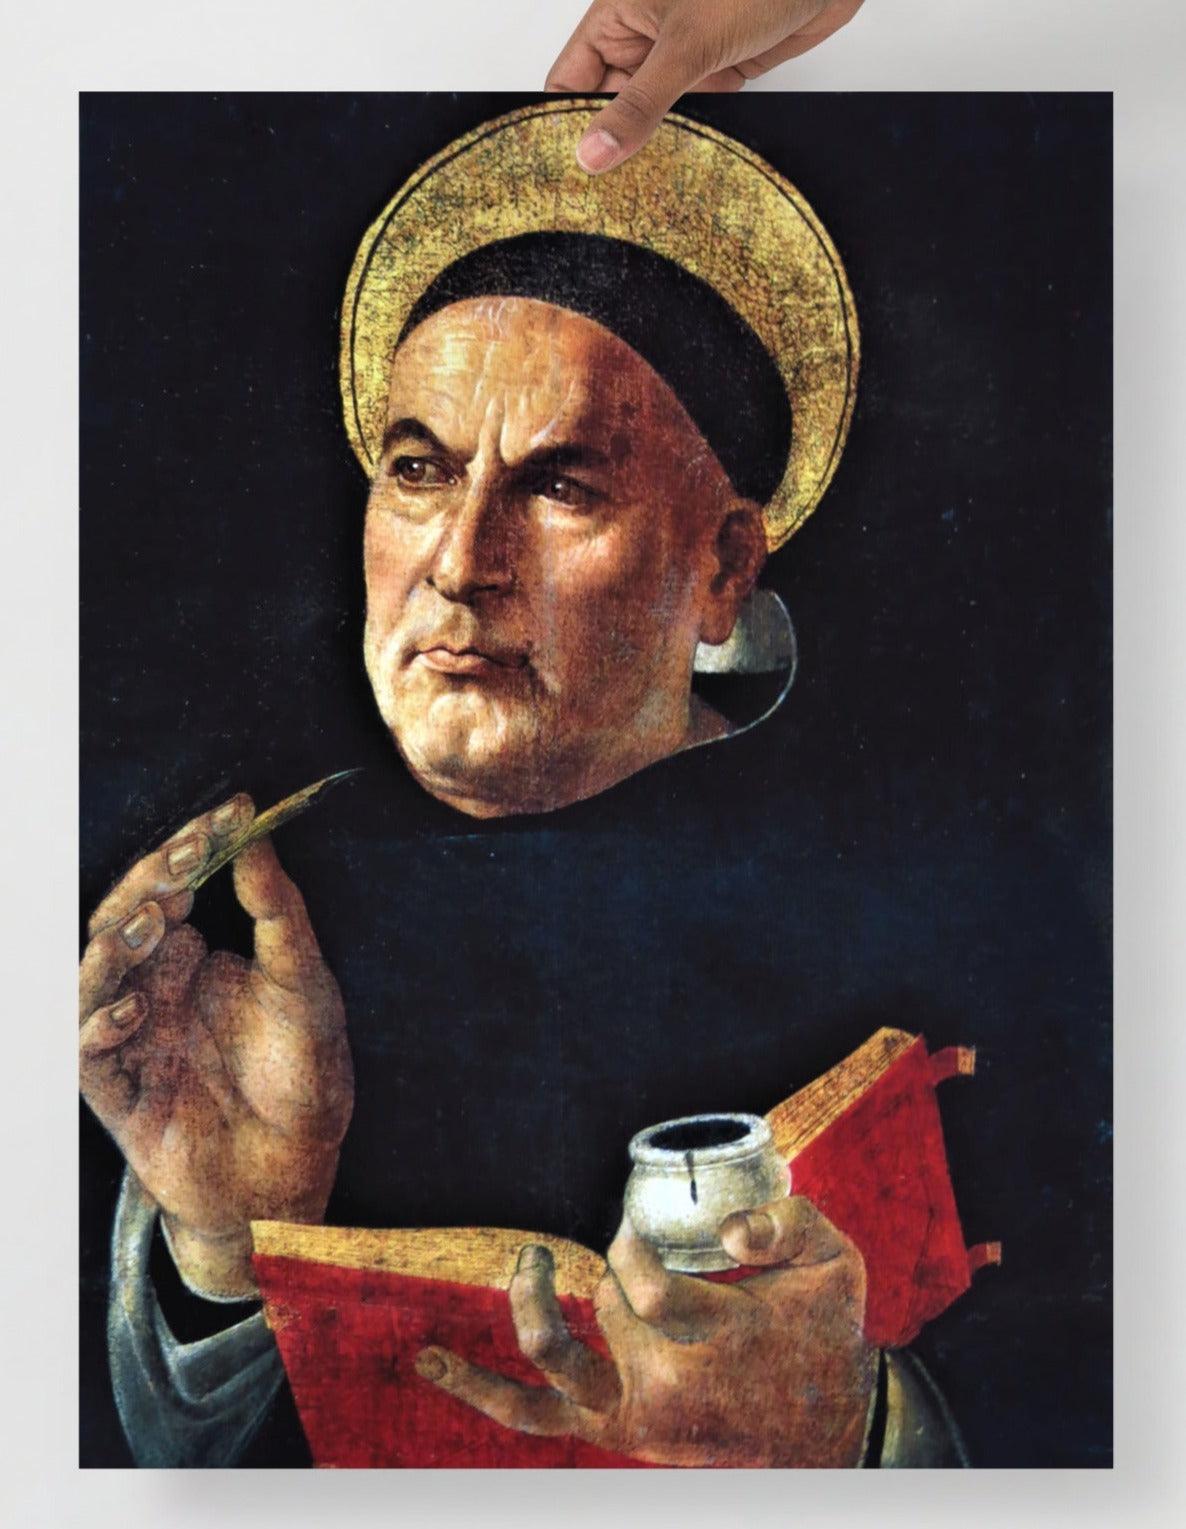 A St. Thomas Aquinas by Sandro Botticelli poster on a plain backdrop in size 18x24”.